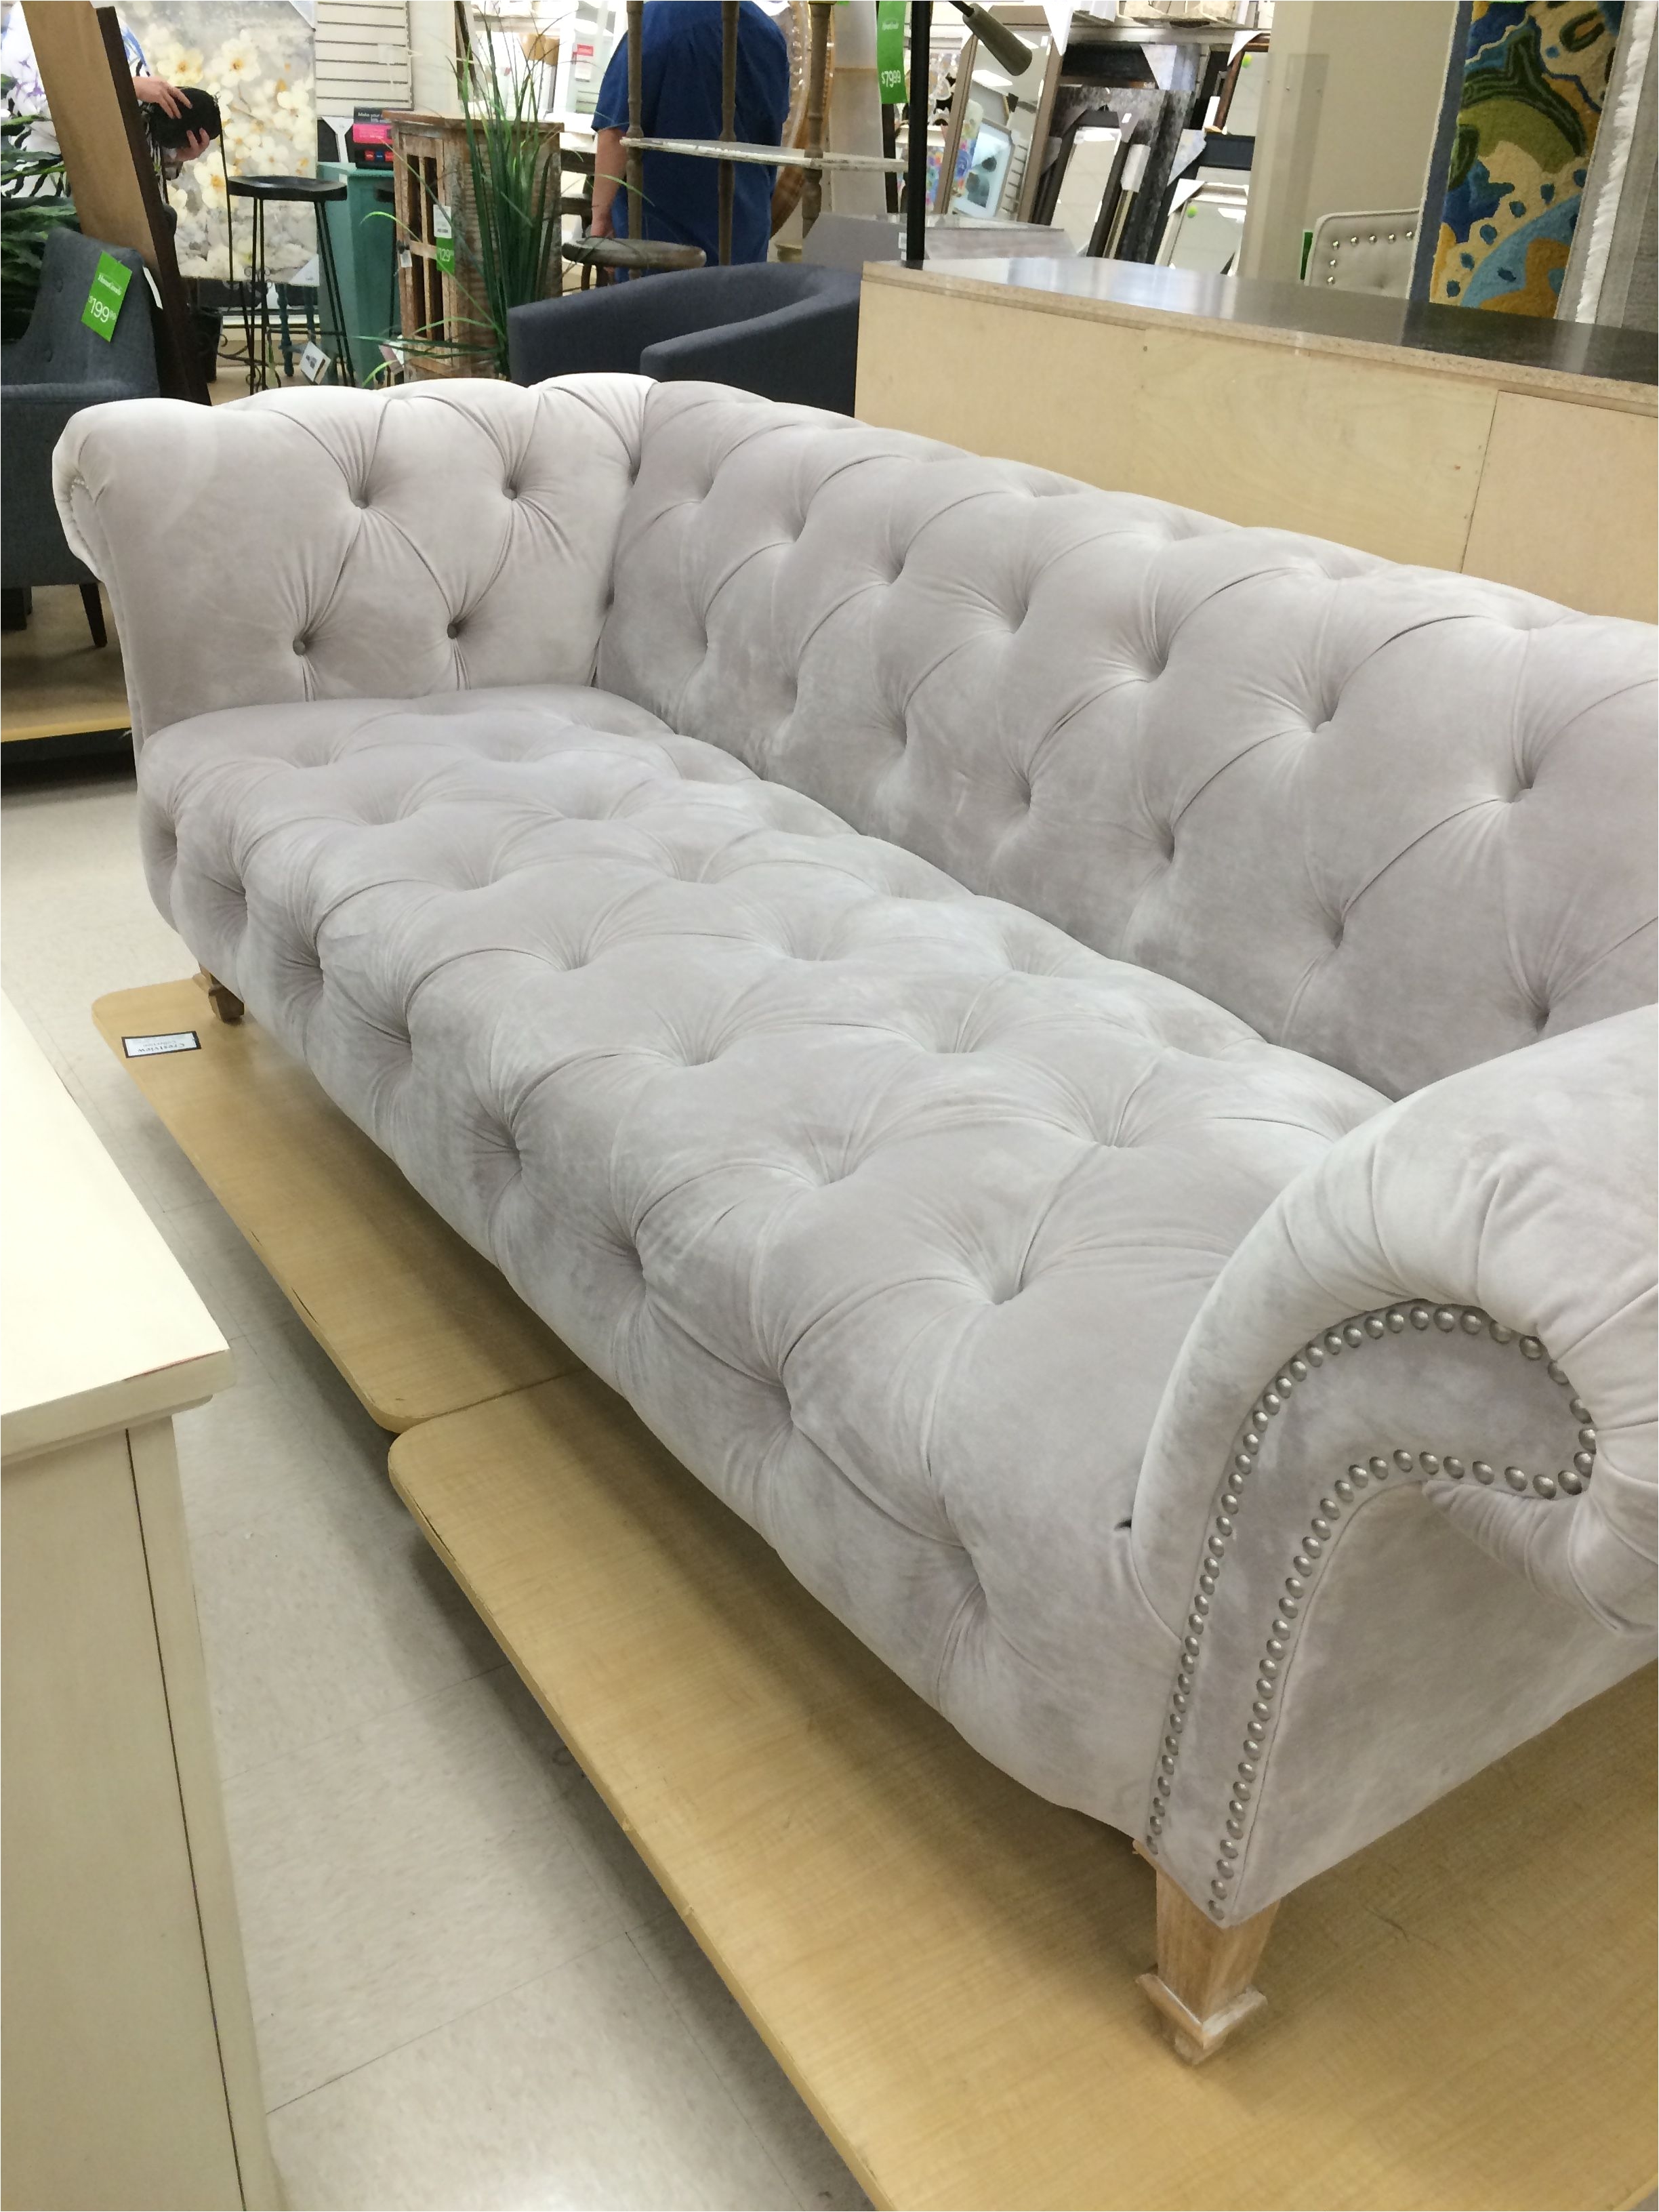 nicole miller couch at marshall s gorgeous